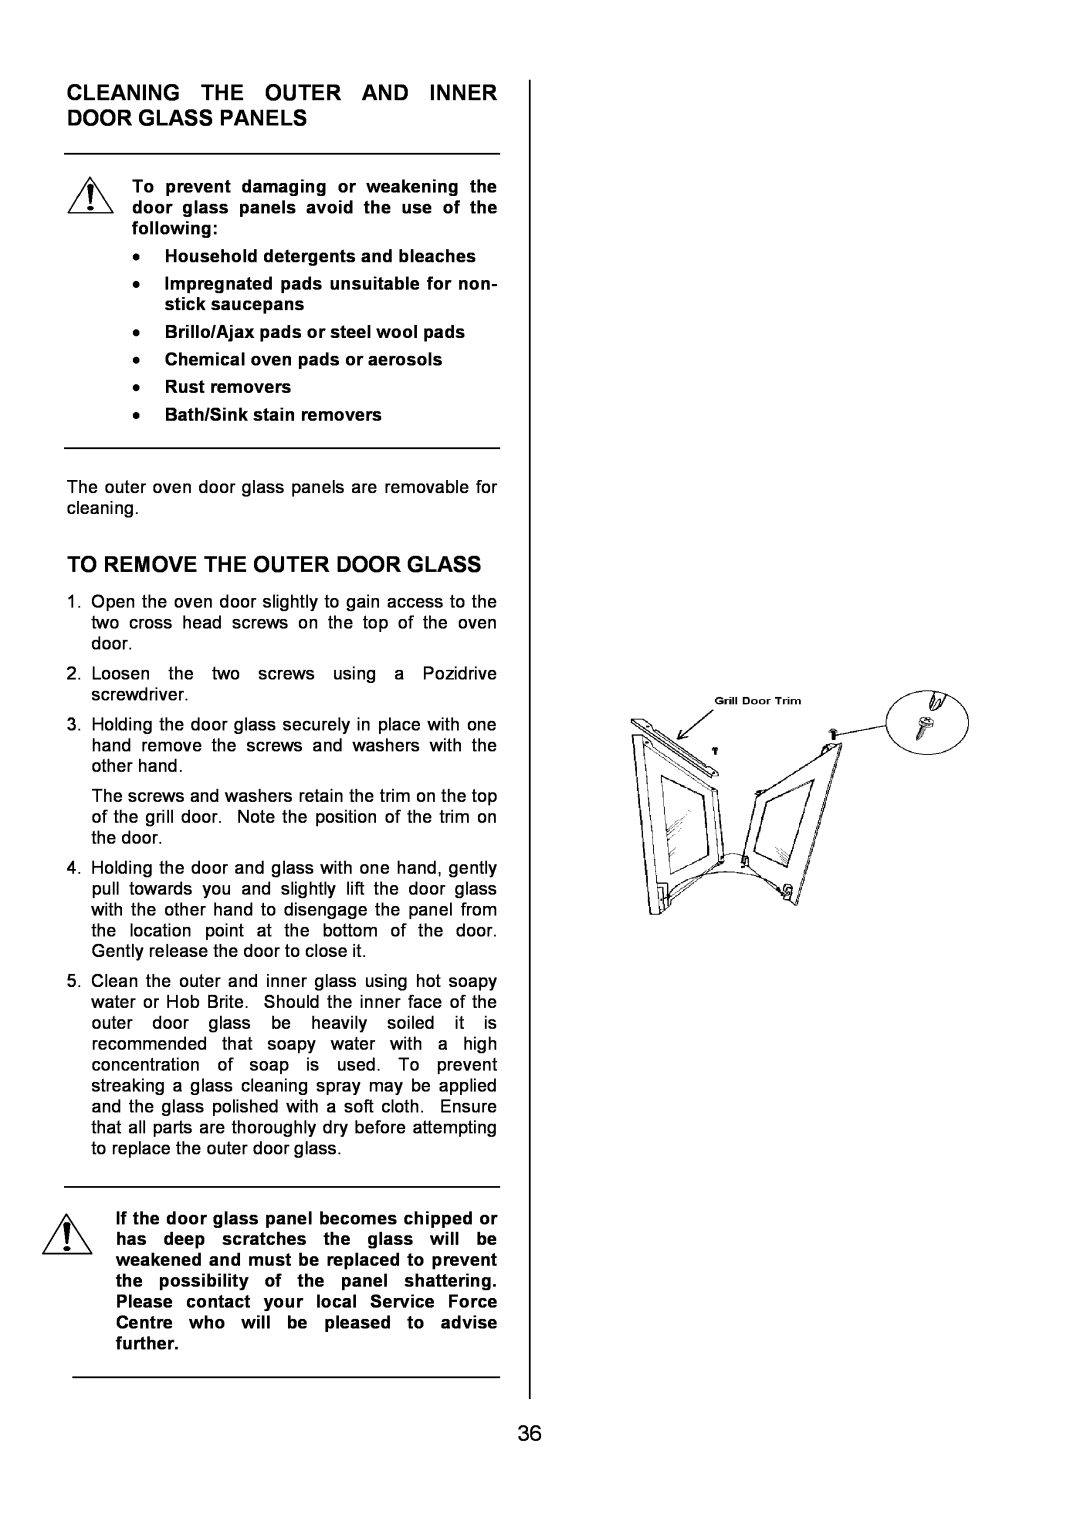 Electrolux U7101-4 operating instructions Cleaning The Outer And Inner Door Glass Panels, To Remove The Outer Door Glass 